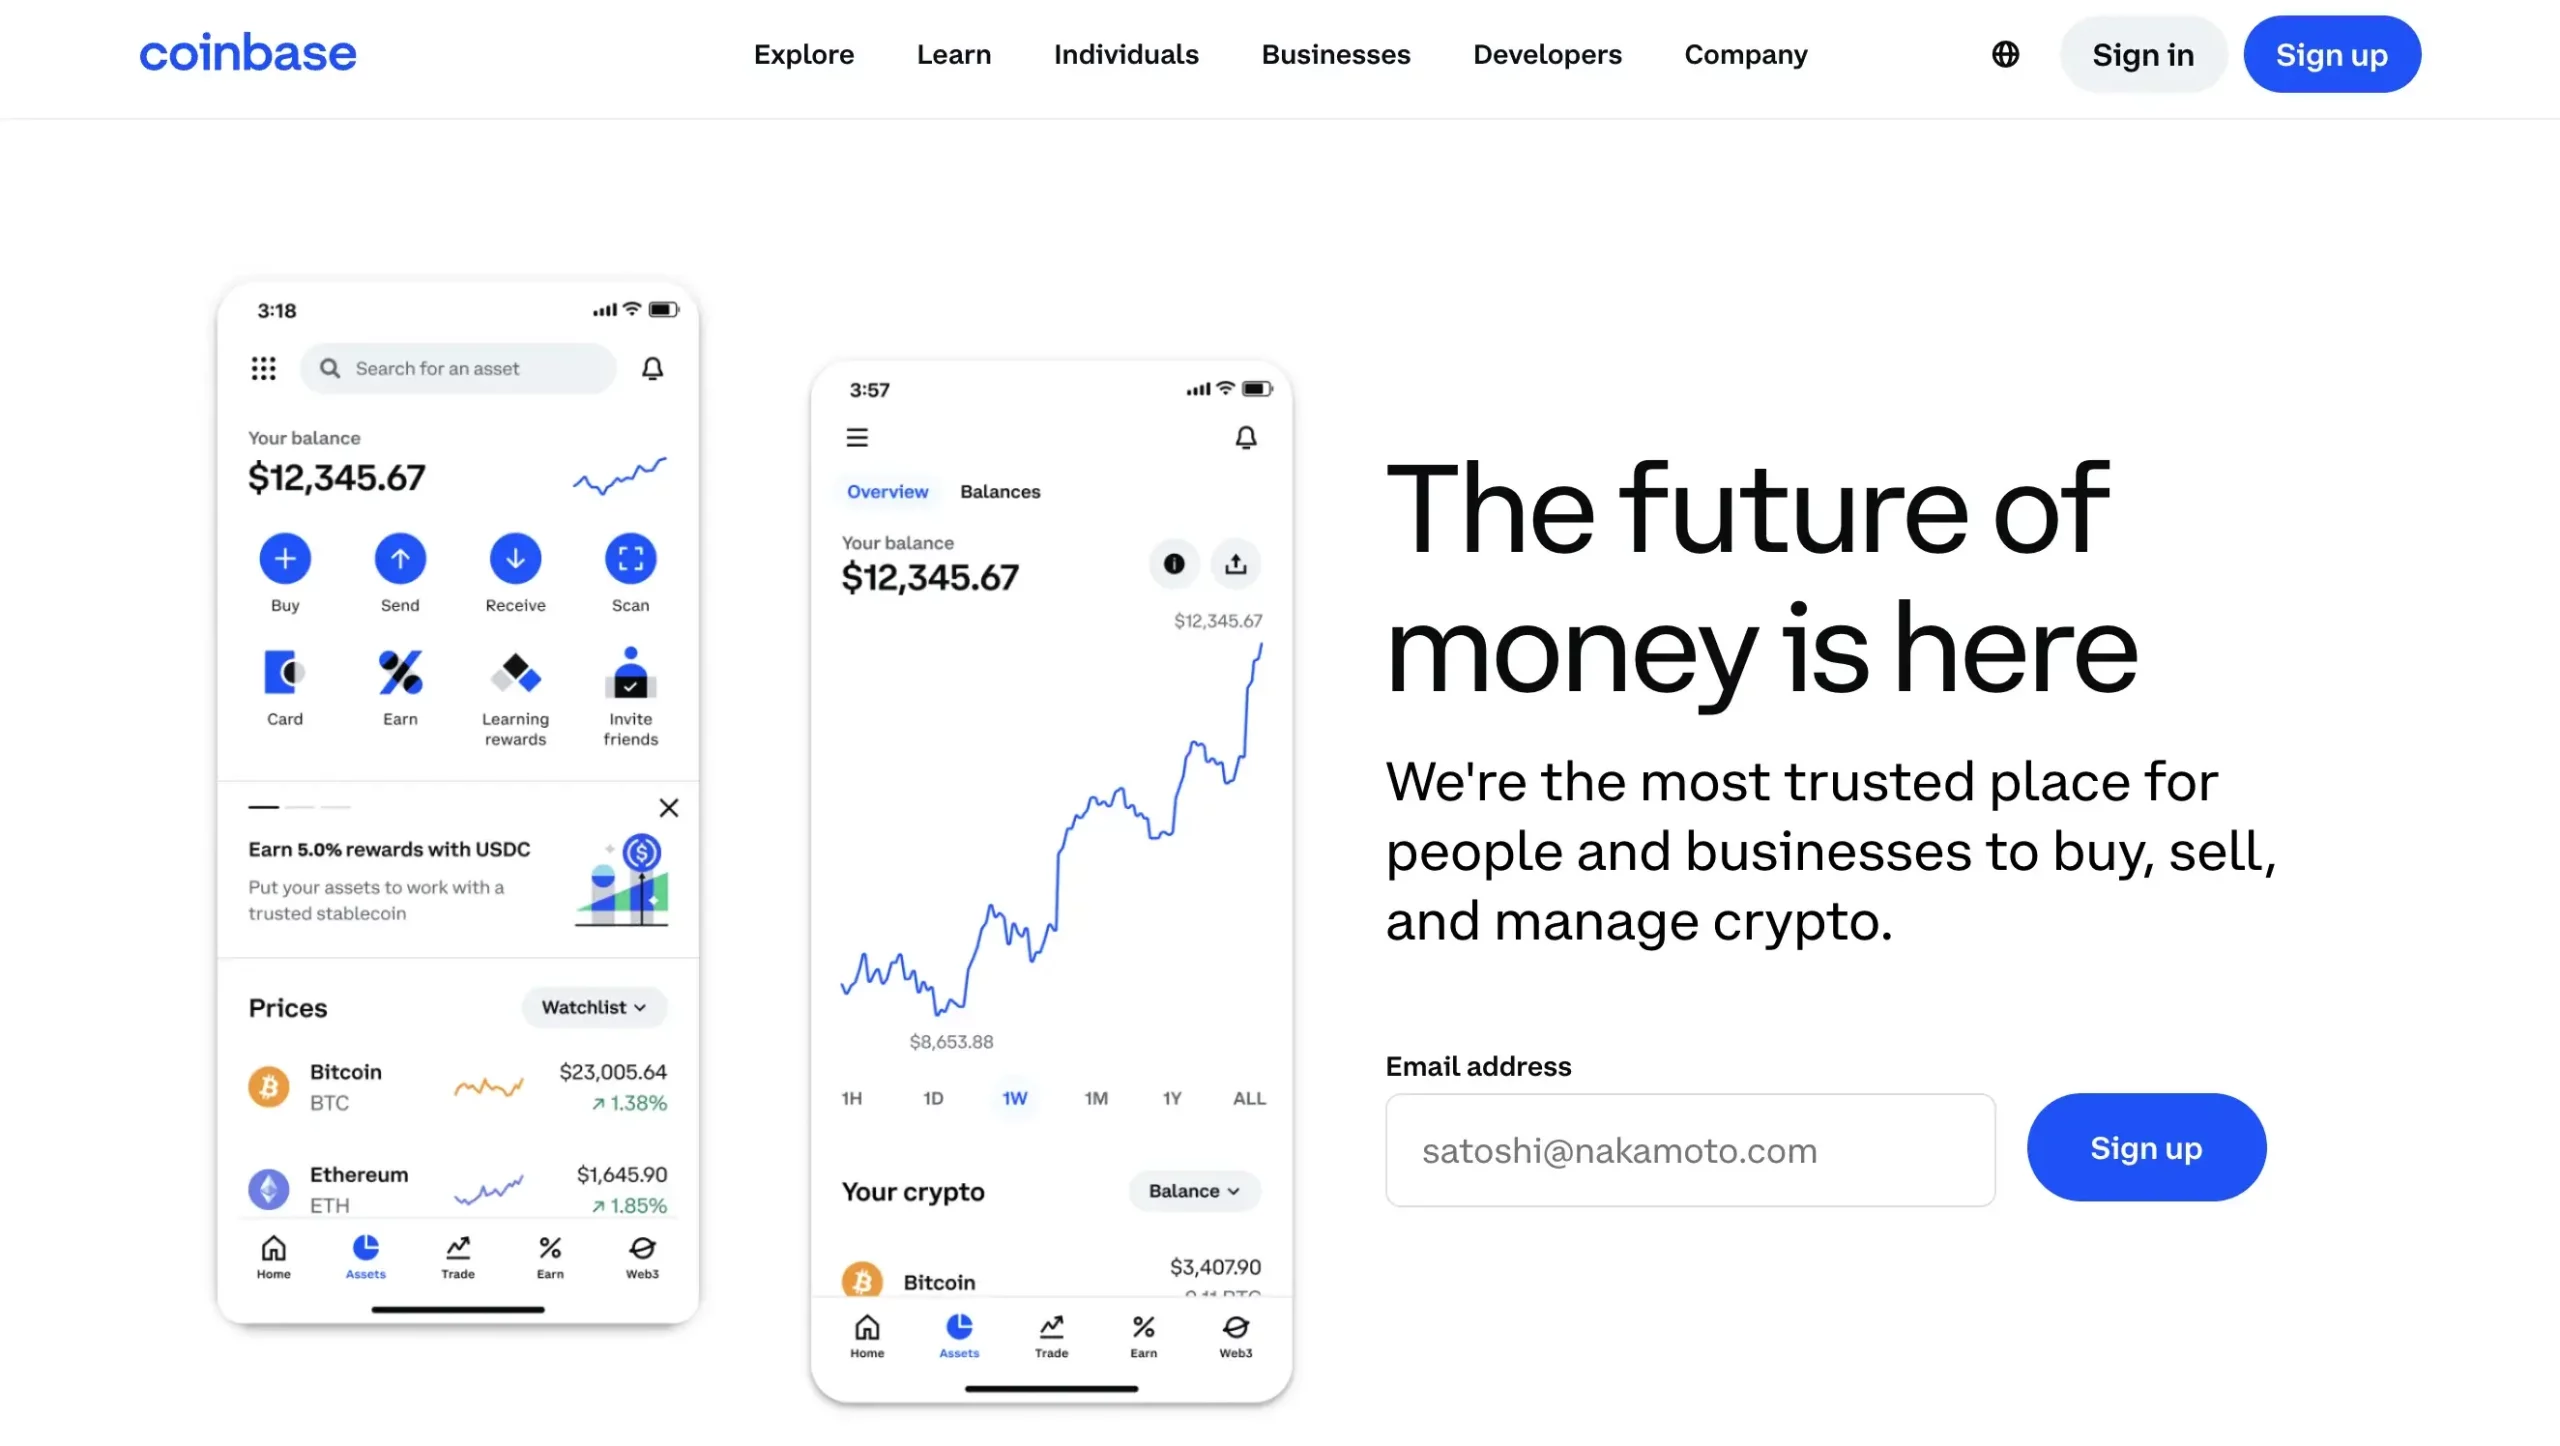 Coinbase Website Overview